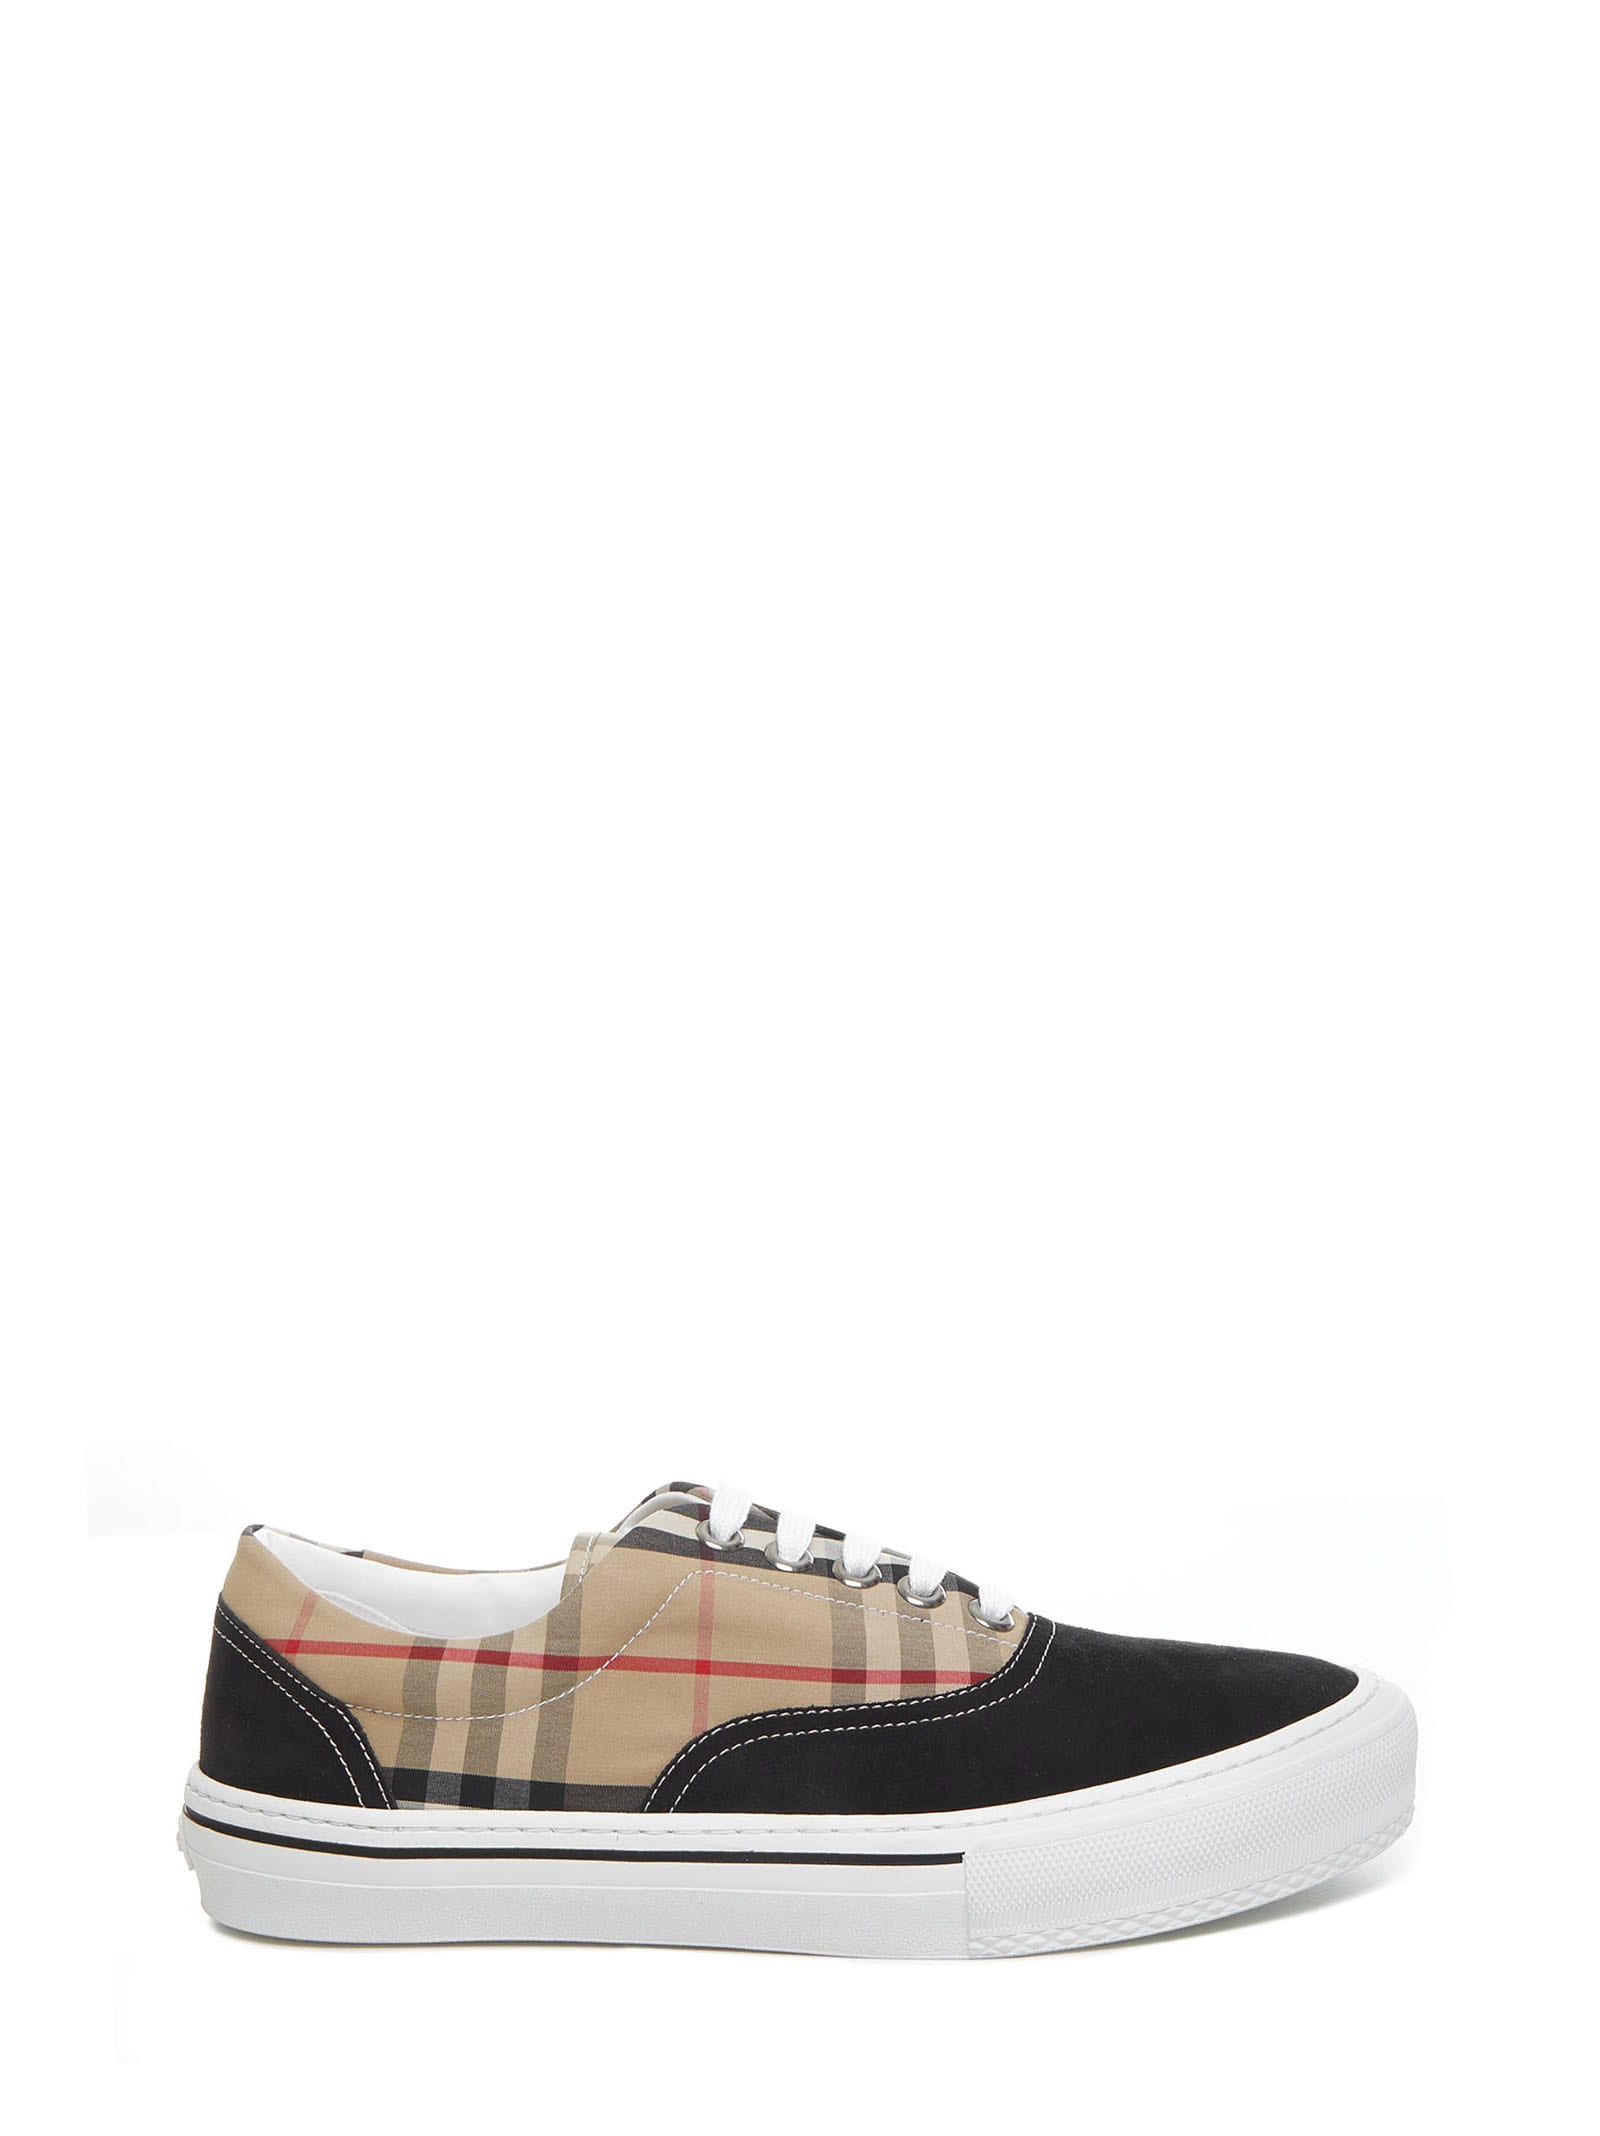 burberry sale sneakers